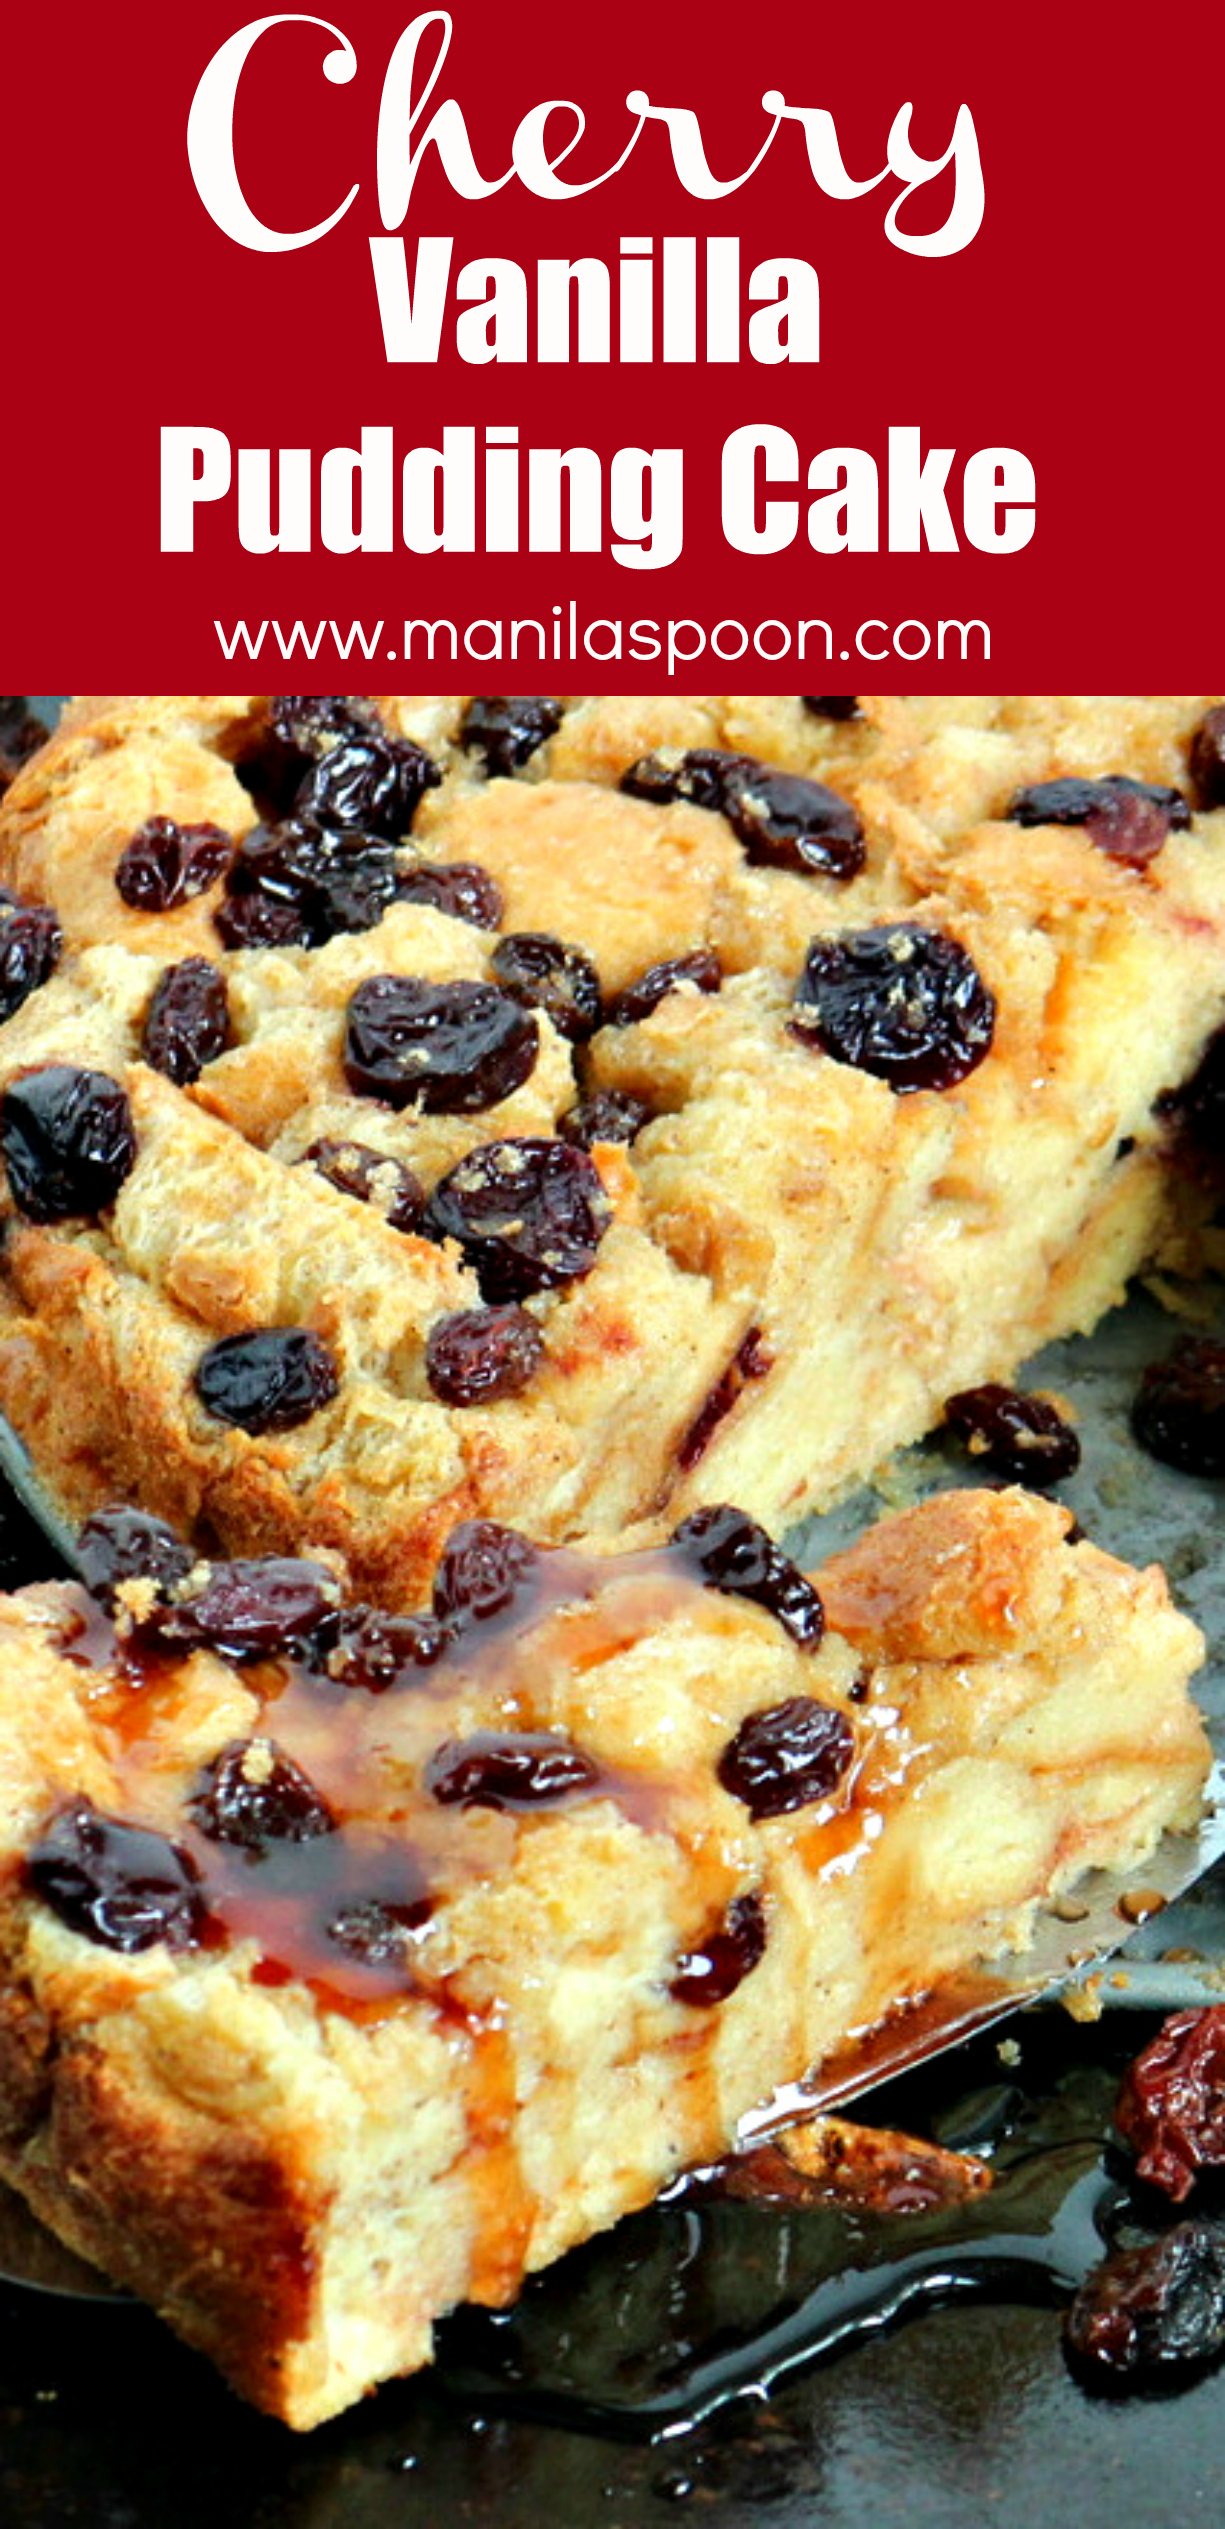 Utterly buttery and loaded with fruits, this vanilla-flavored bread pudding cake is the yummiest breakfast or brunch treat! Use cherries, cranberries or your favorite dried berries to personalize it.